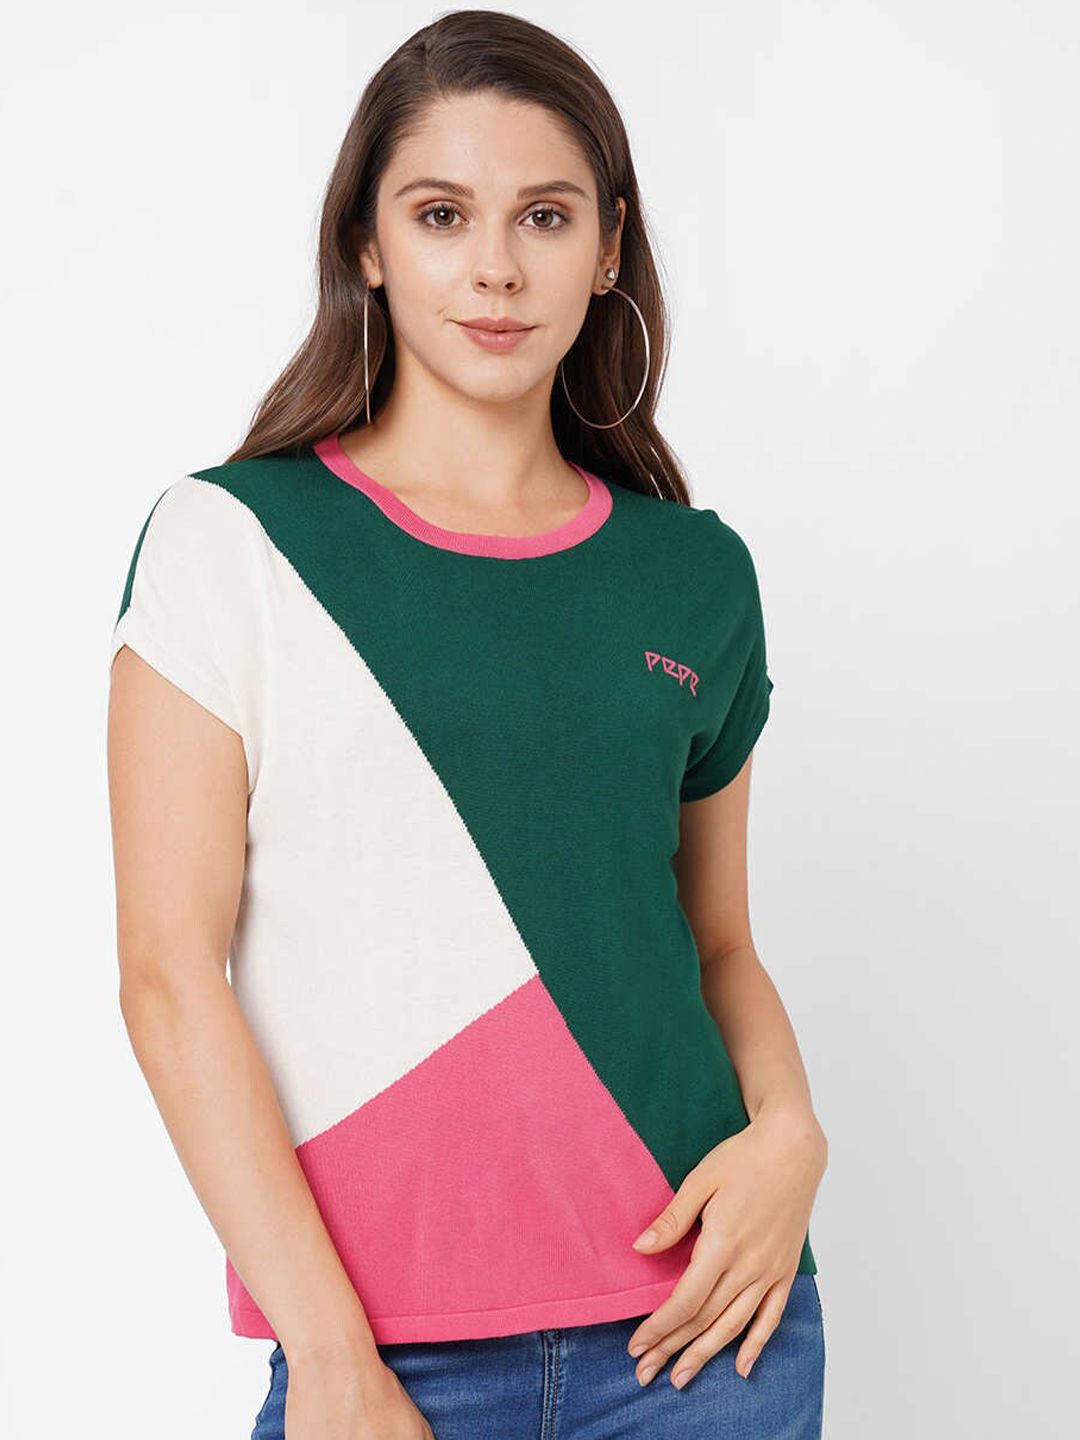 Pepe Jeans Green & White Colourblocked Knitted Top Price in India